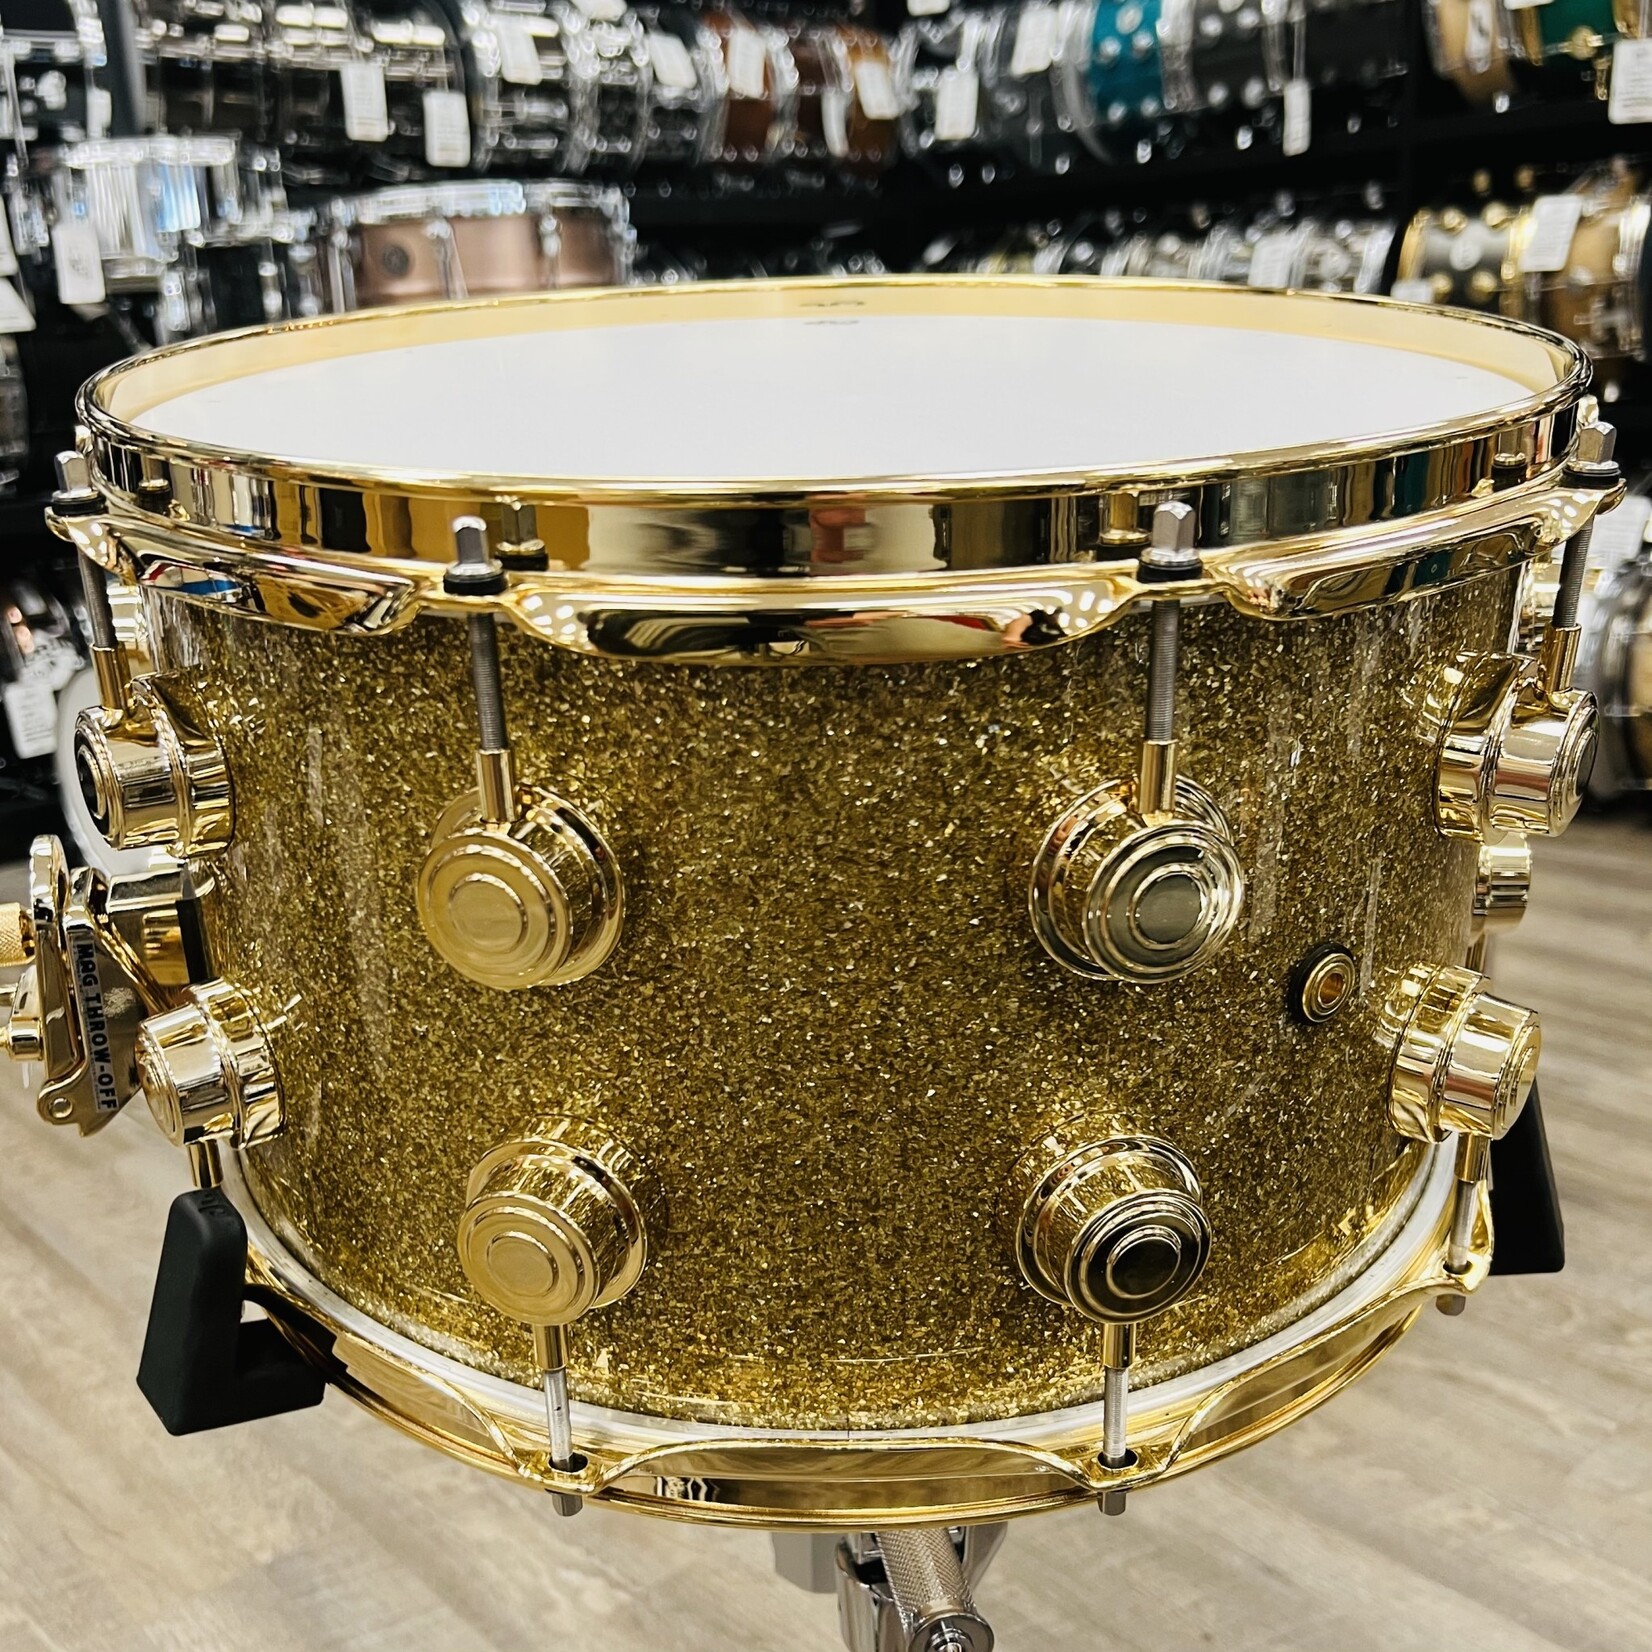 DW DW Collector's Series 8x14" Standard Maple Snare Drum (Gold Glass w/ Gold Hardware)